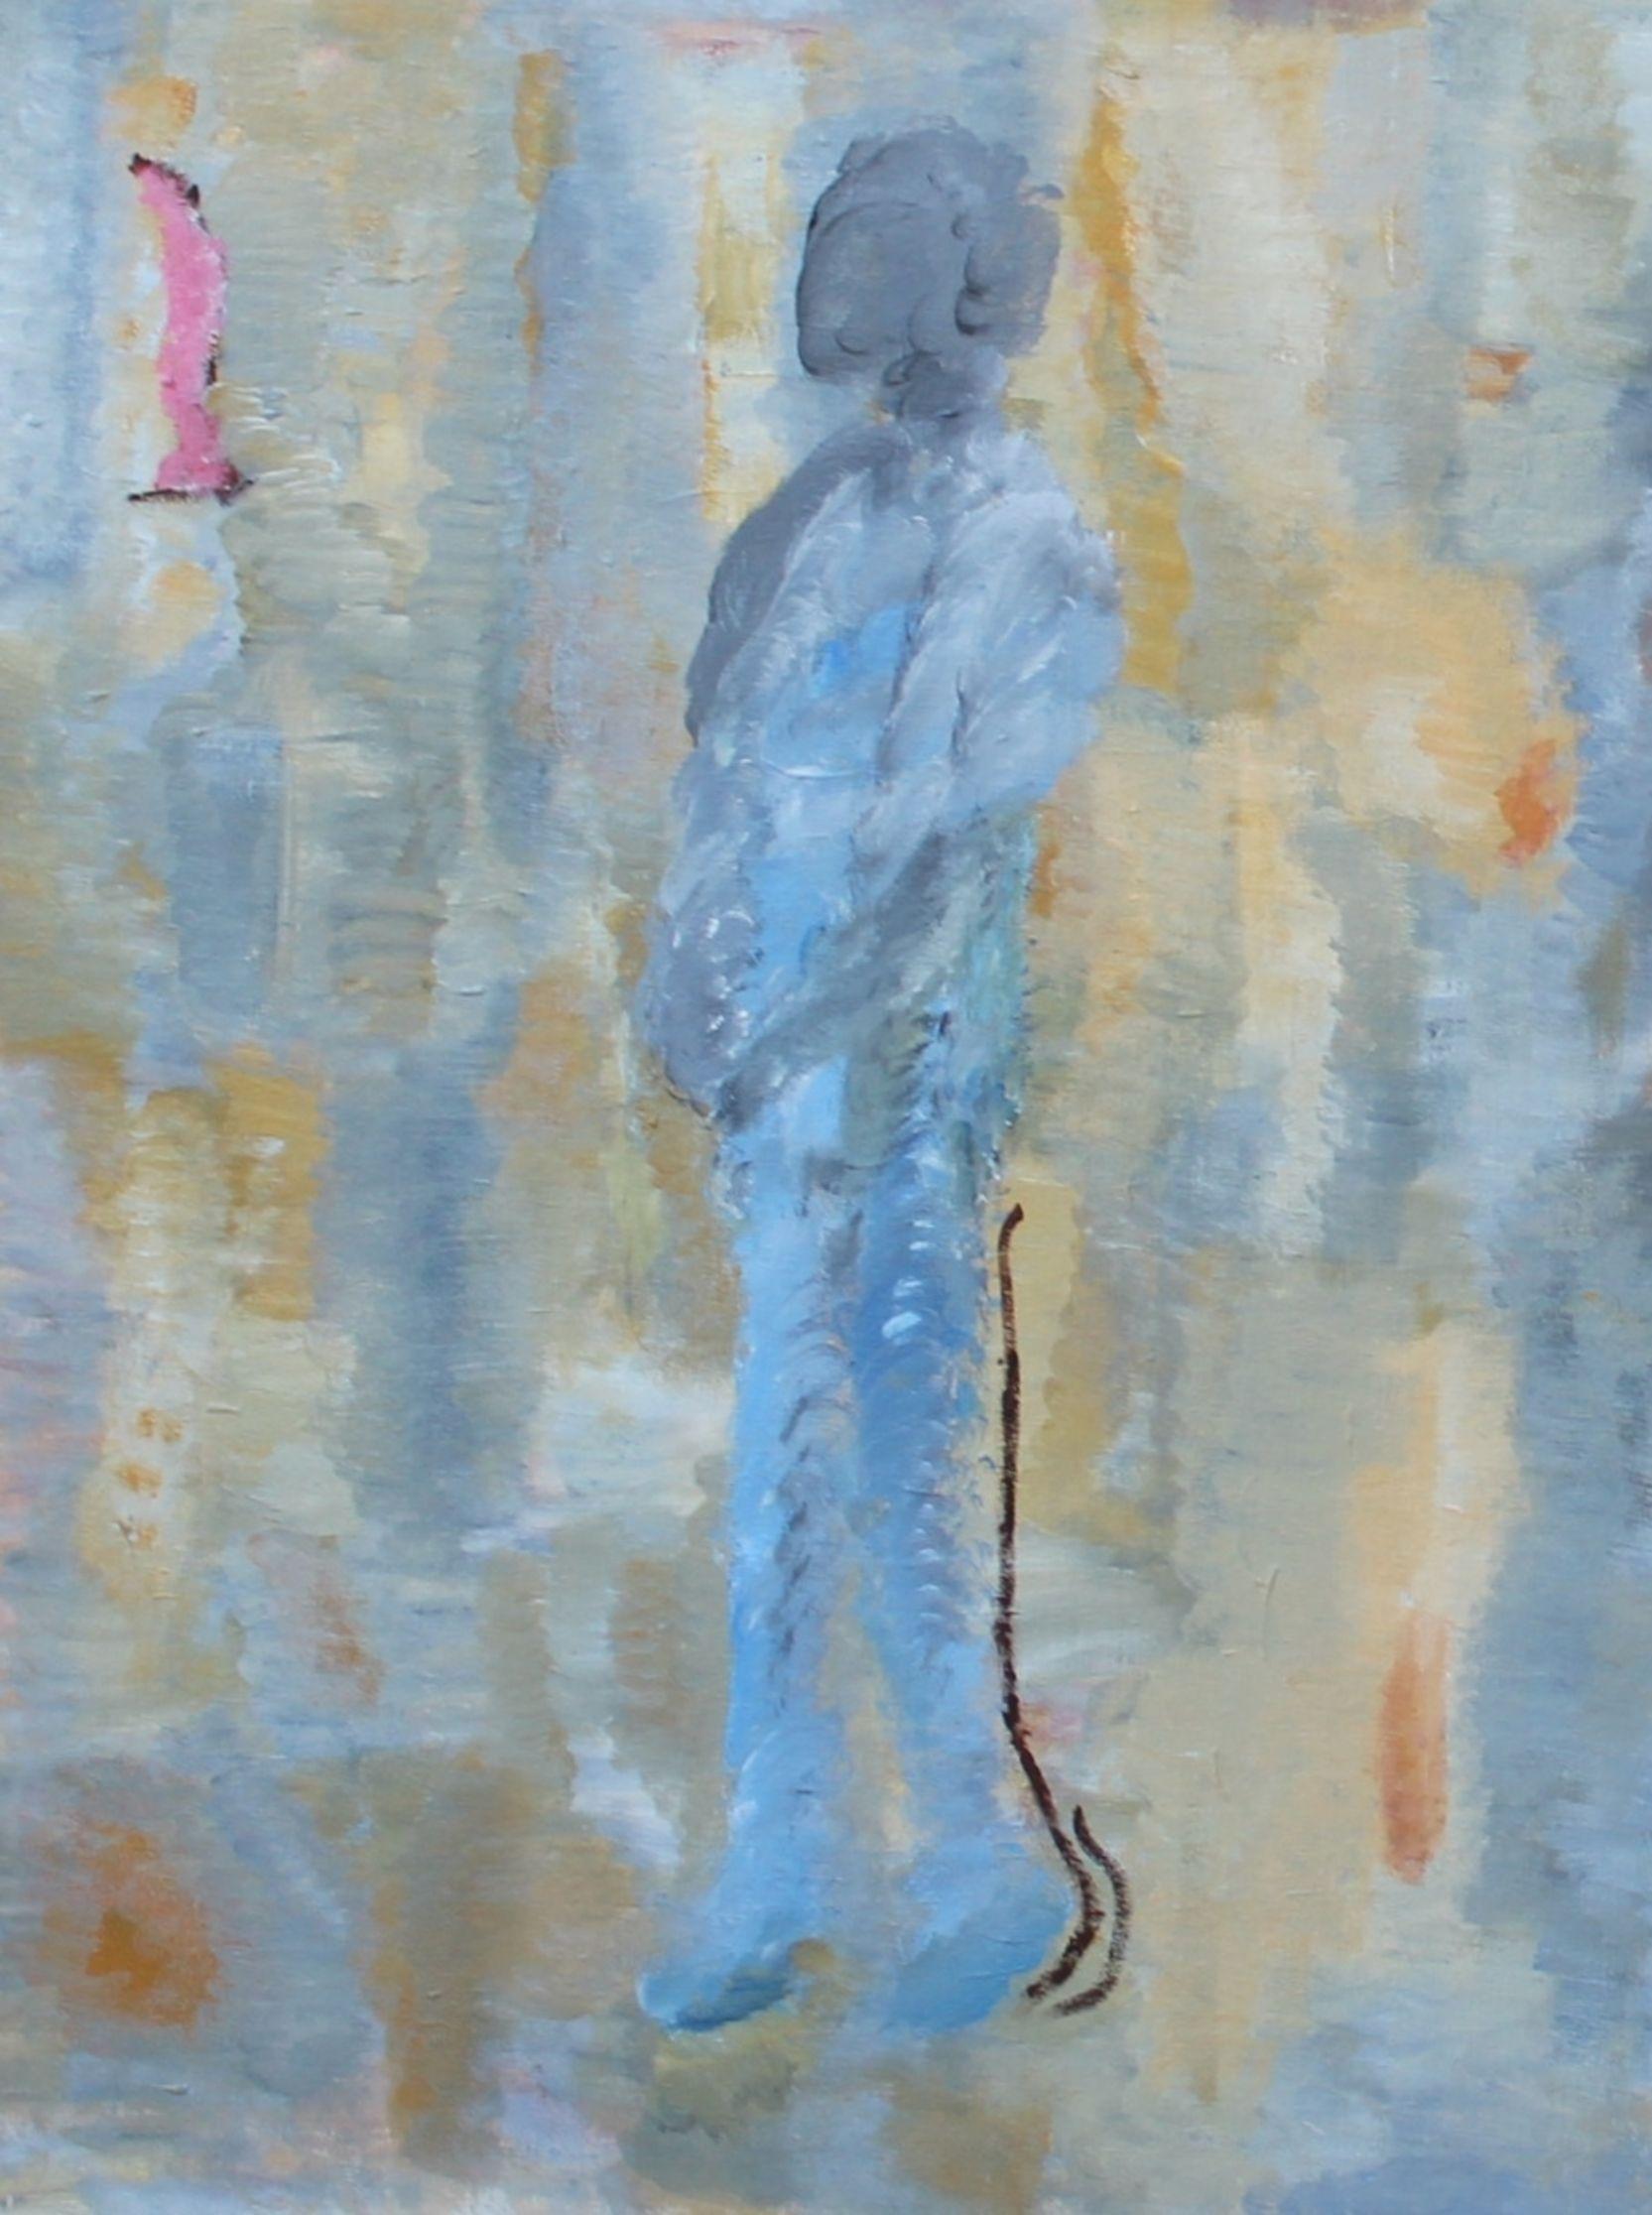 this painting is done on a canvas panel in a post-impressionist way. I have abstracted the figure as a fleeting image, purposely providing no details. I believe that this is not an easy thing to do, ( unless you got some inspiration), especially